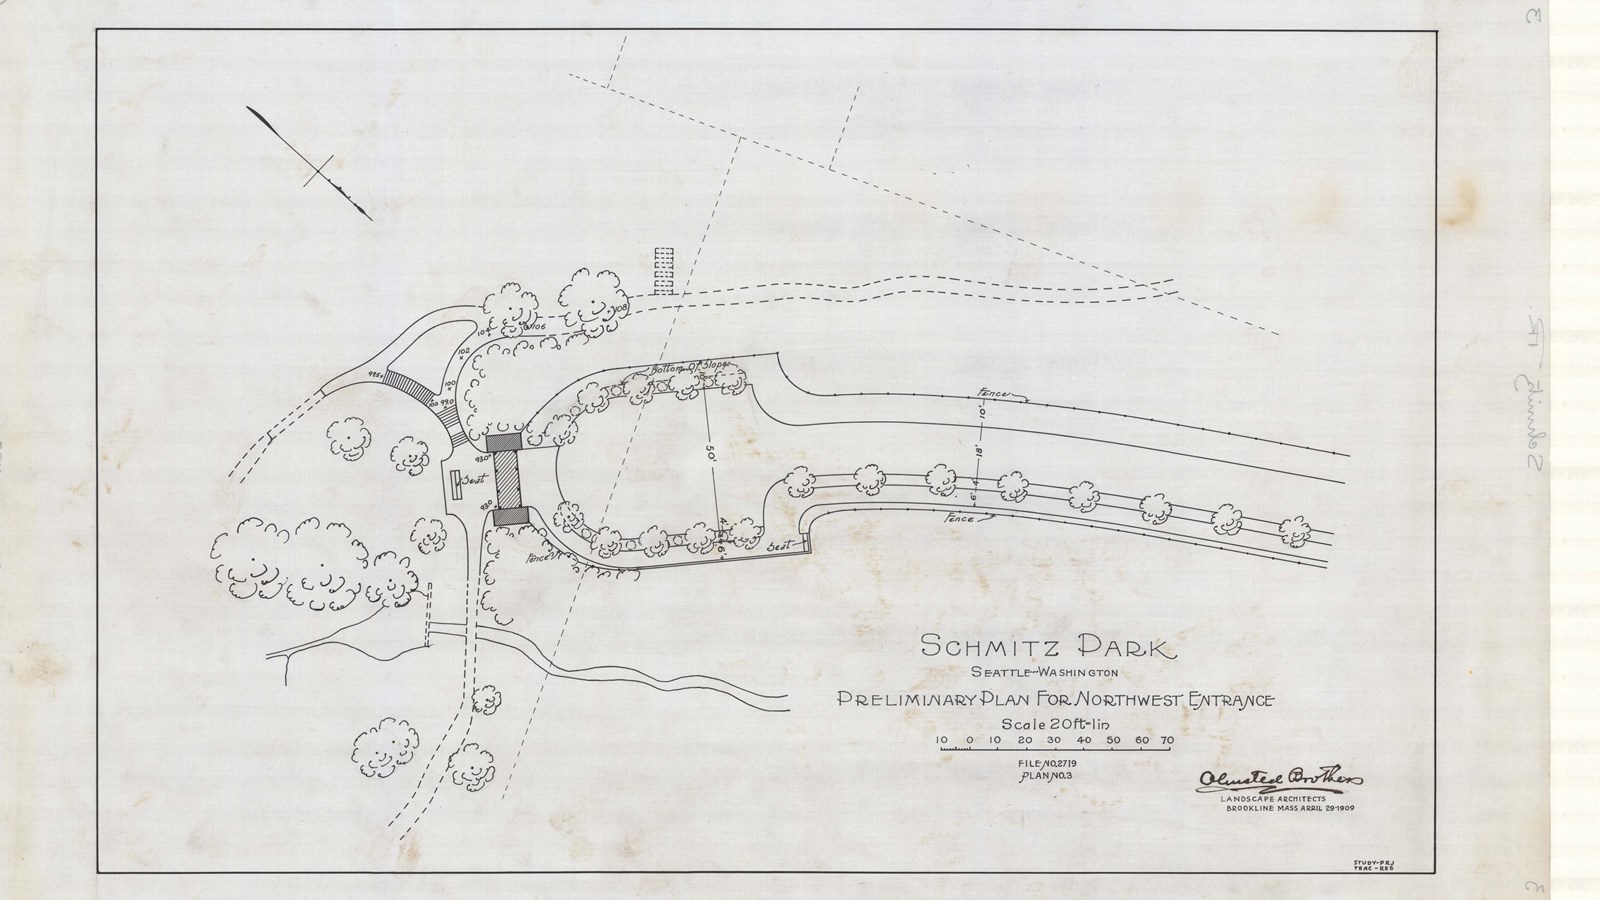 Plan of park with path lined with trees leading to open space and more paths with trees along it